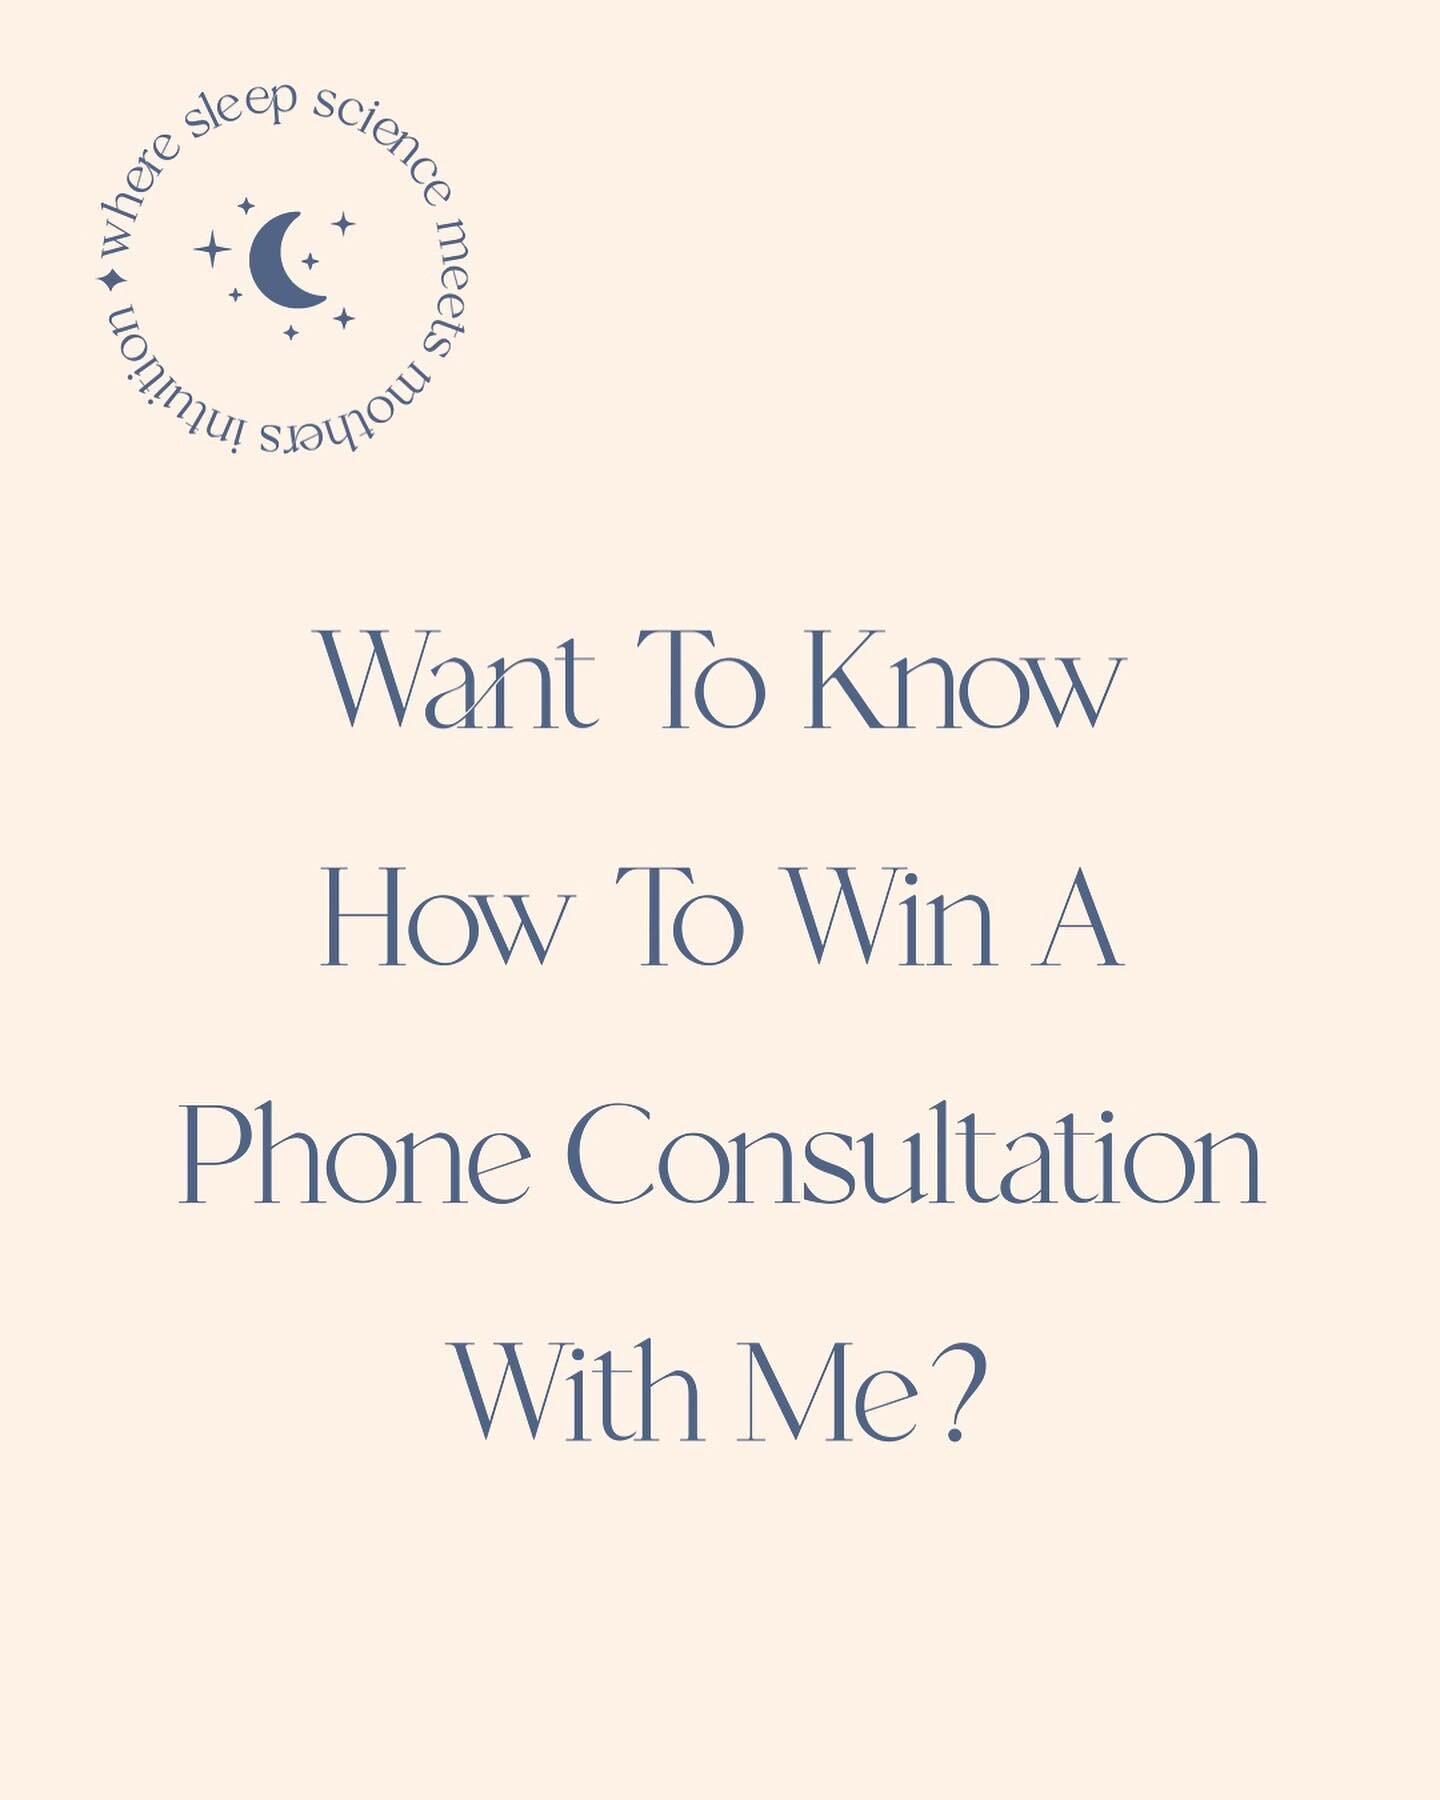 Head over to my last reel to find out how you can win one of the TWO phone consultations I am giving away to celebrate my rebrand and new website! 

#competition #workwithme #babysleepconsultant #sleepconsultant #babysleeptips #sleepexpert